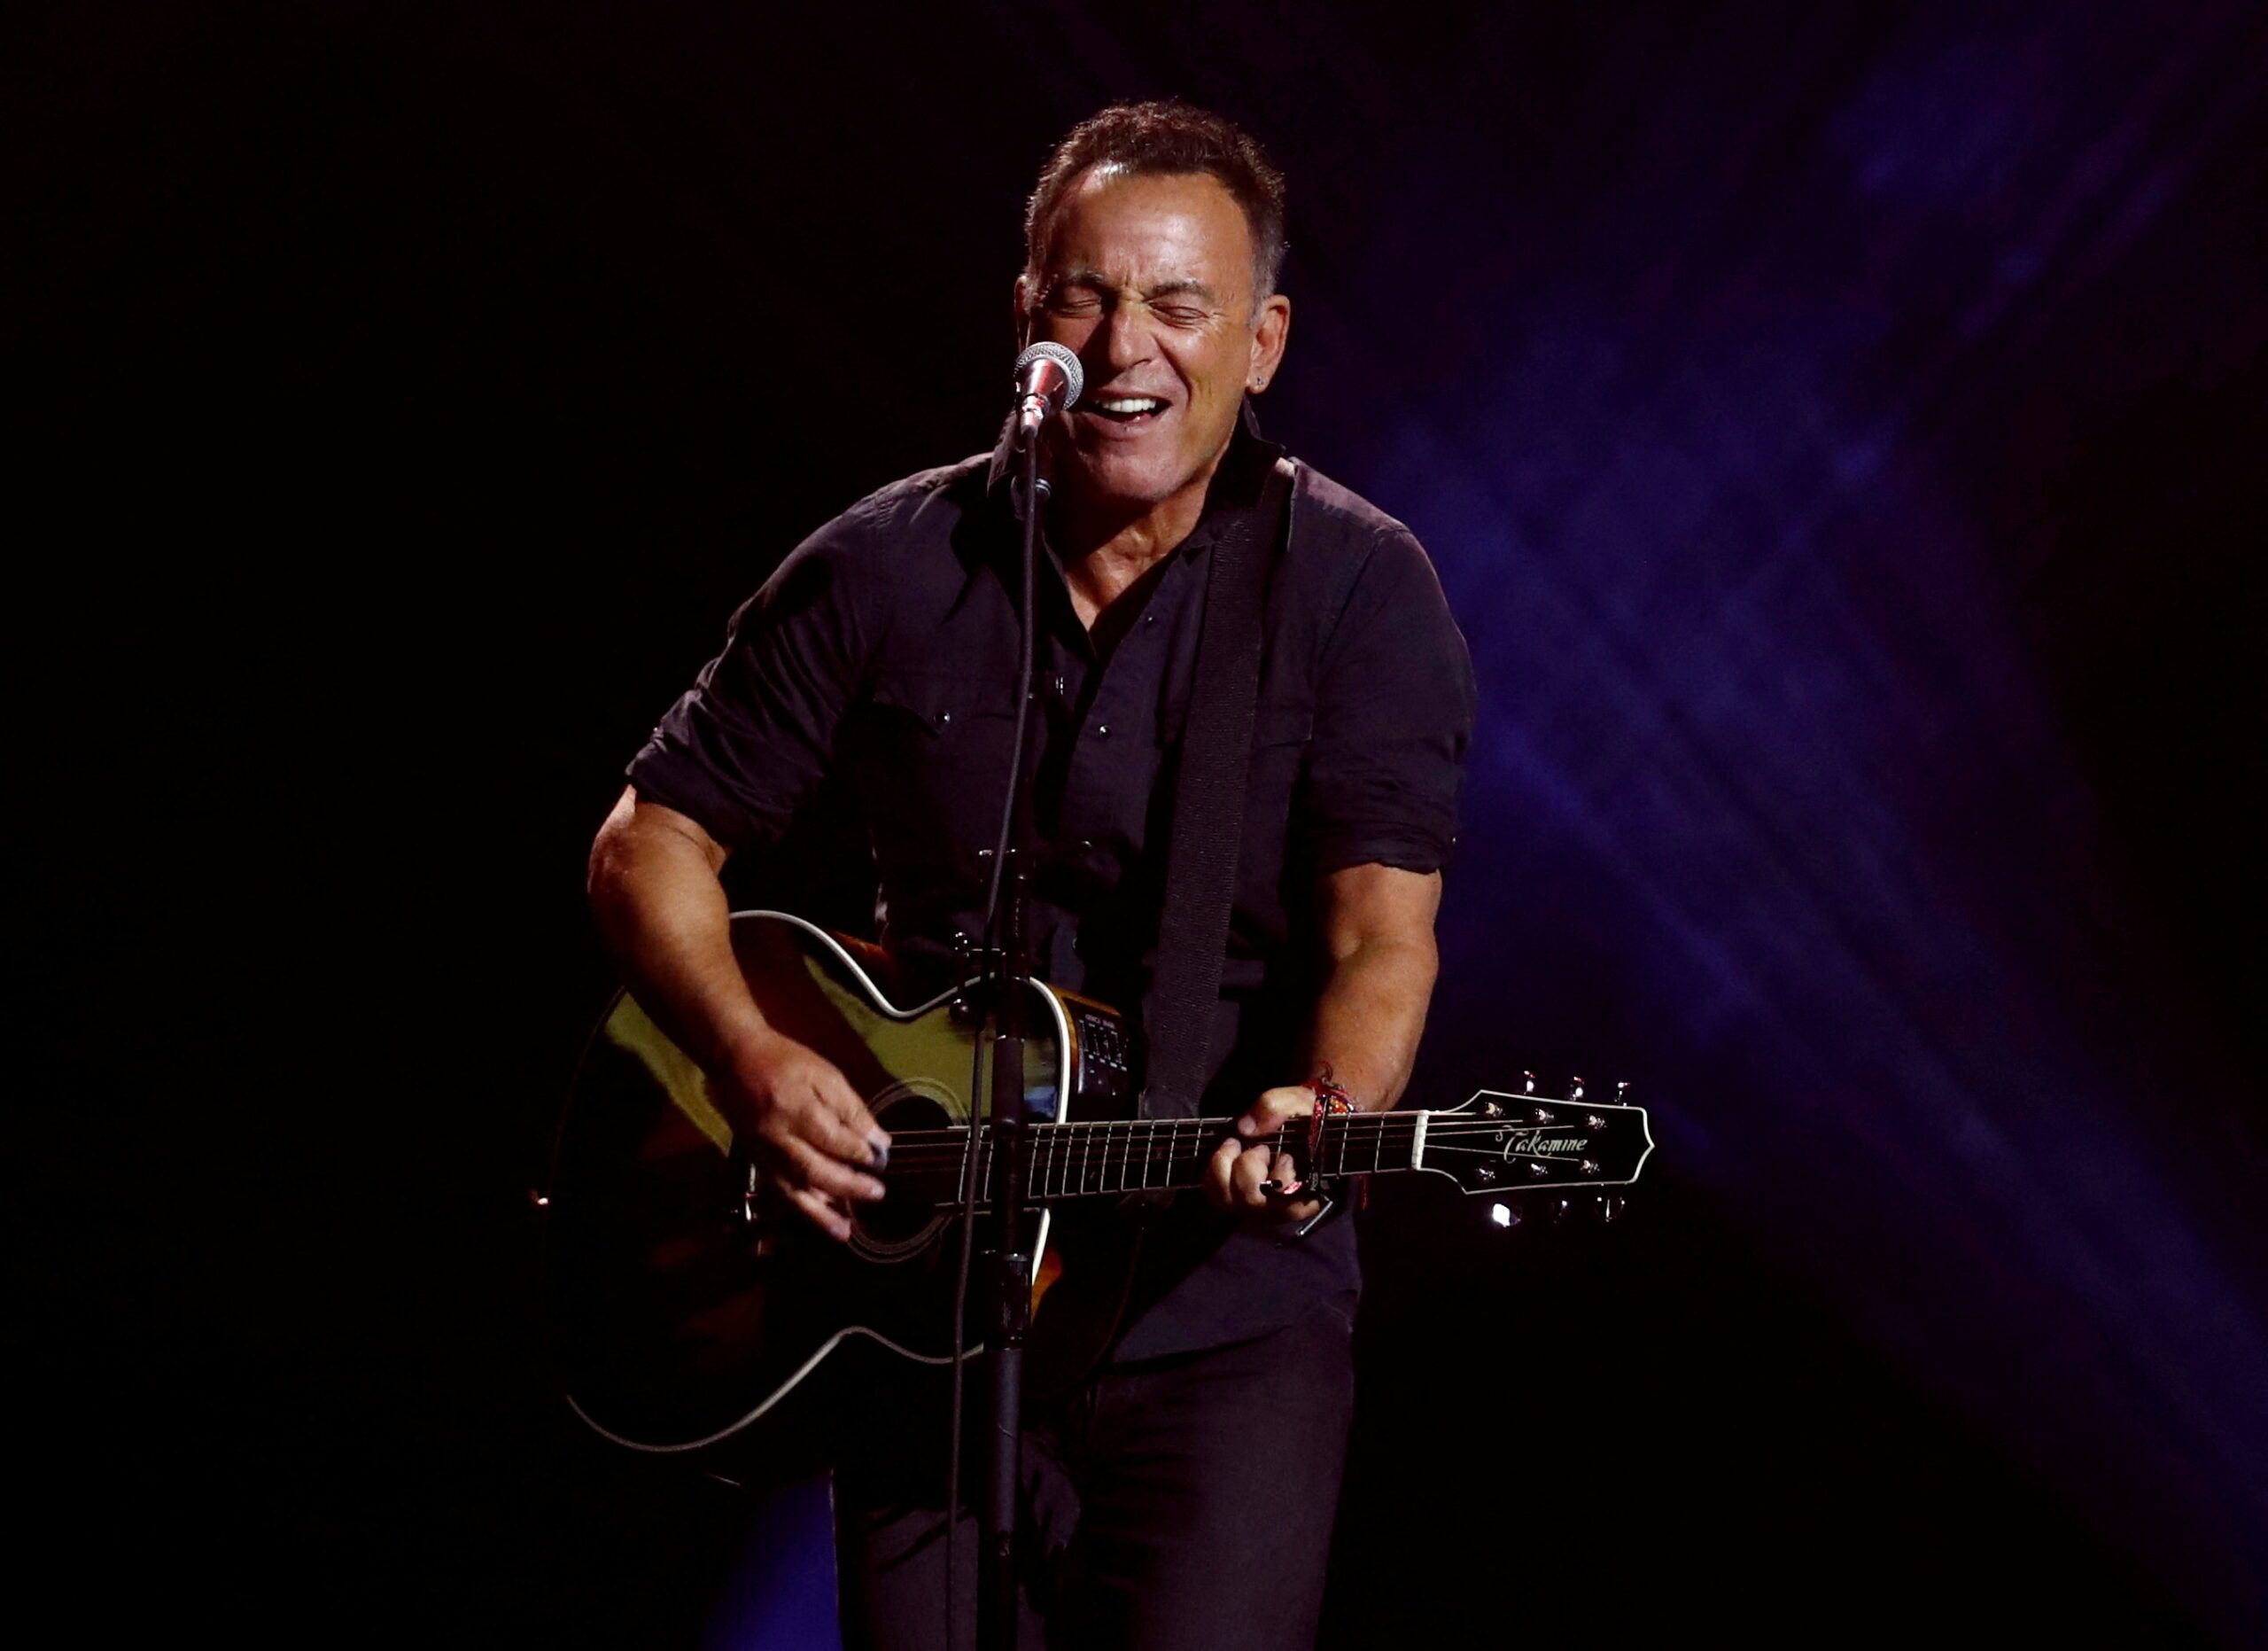 Bruce Springsteen sells songs in $500 million deal with Sony